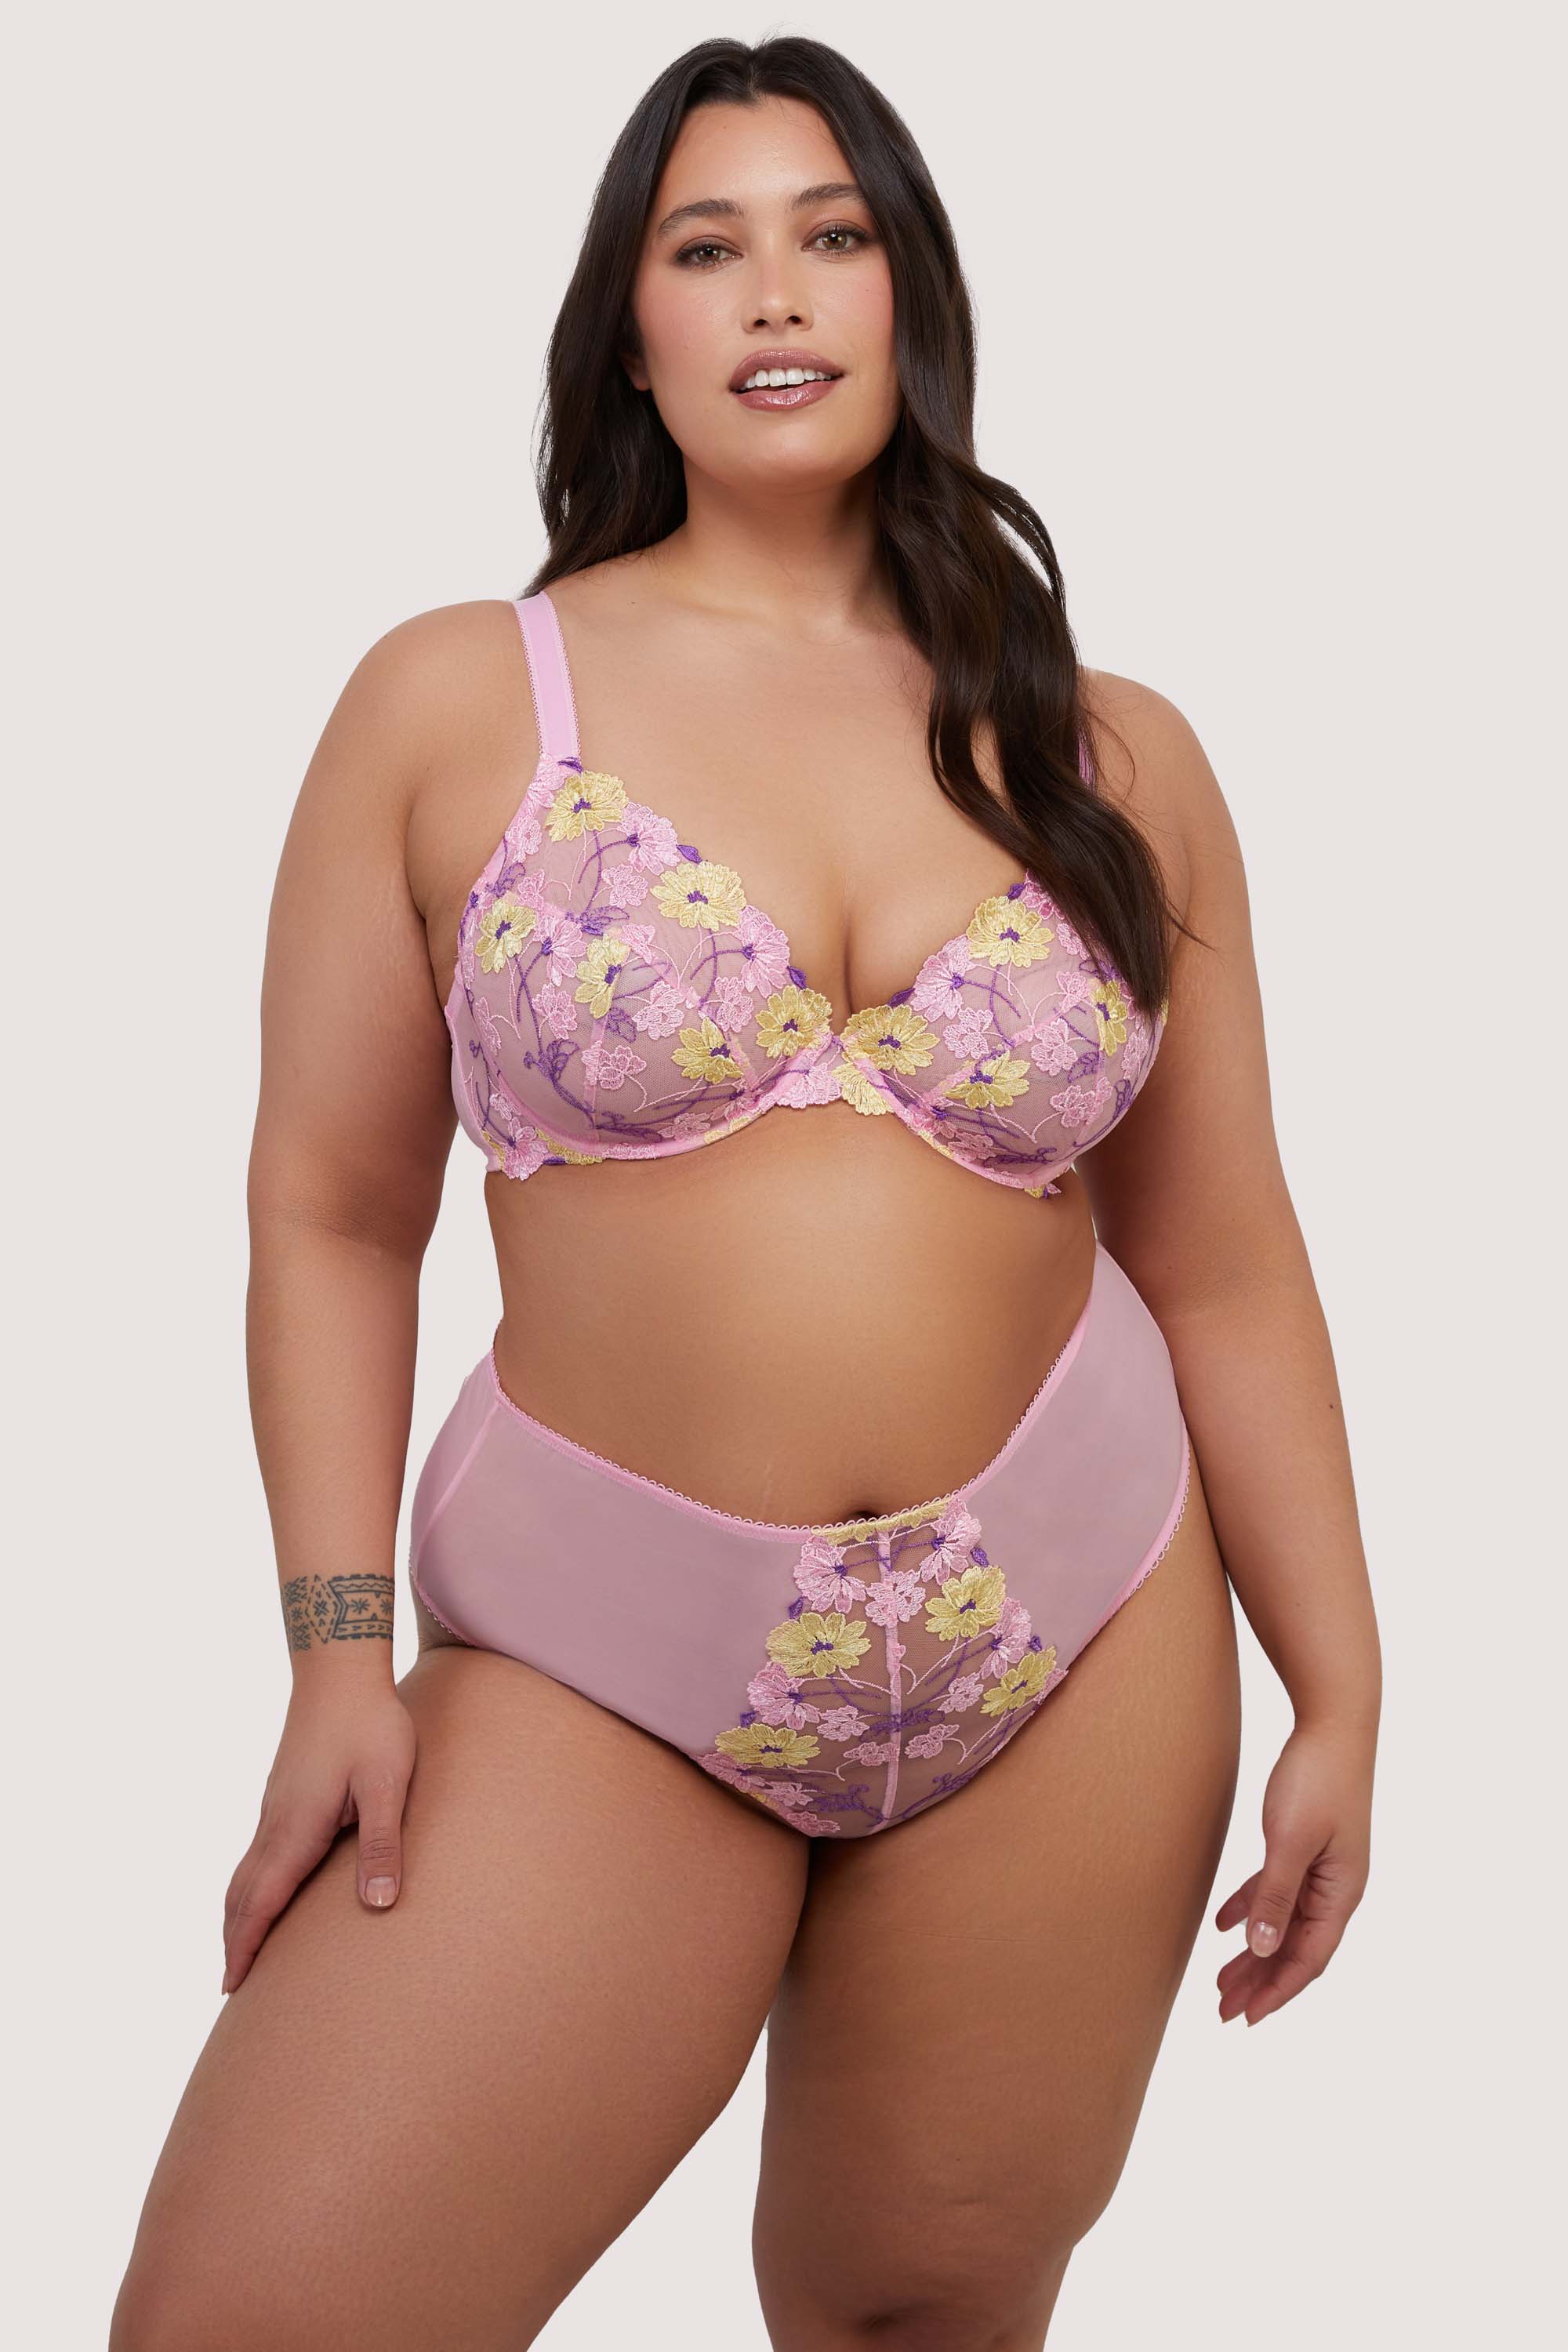 model wears pink floral bra and high waist thong lingerie set